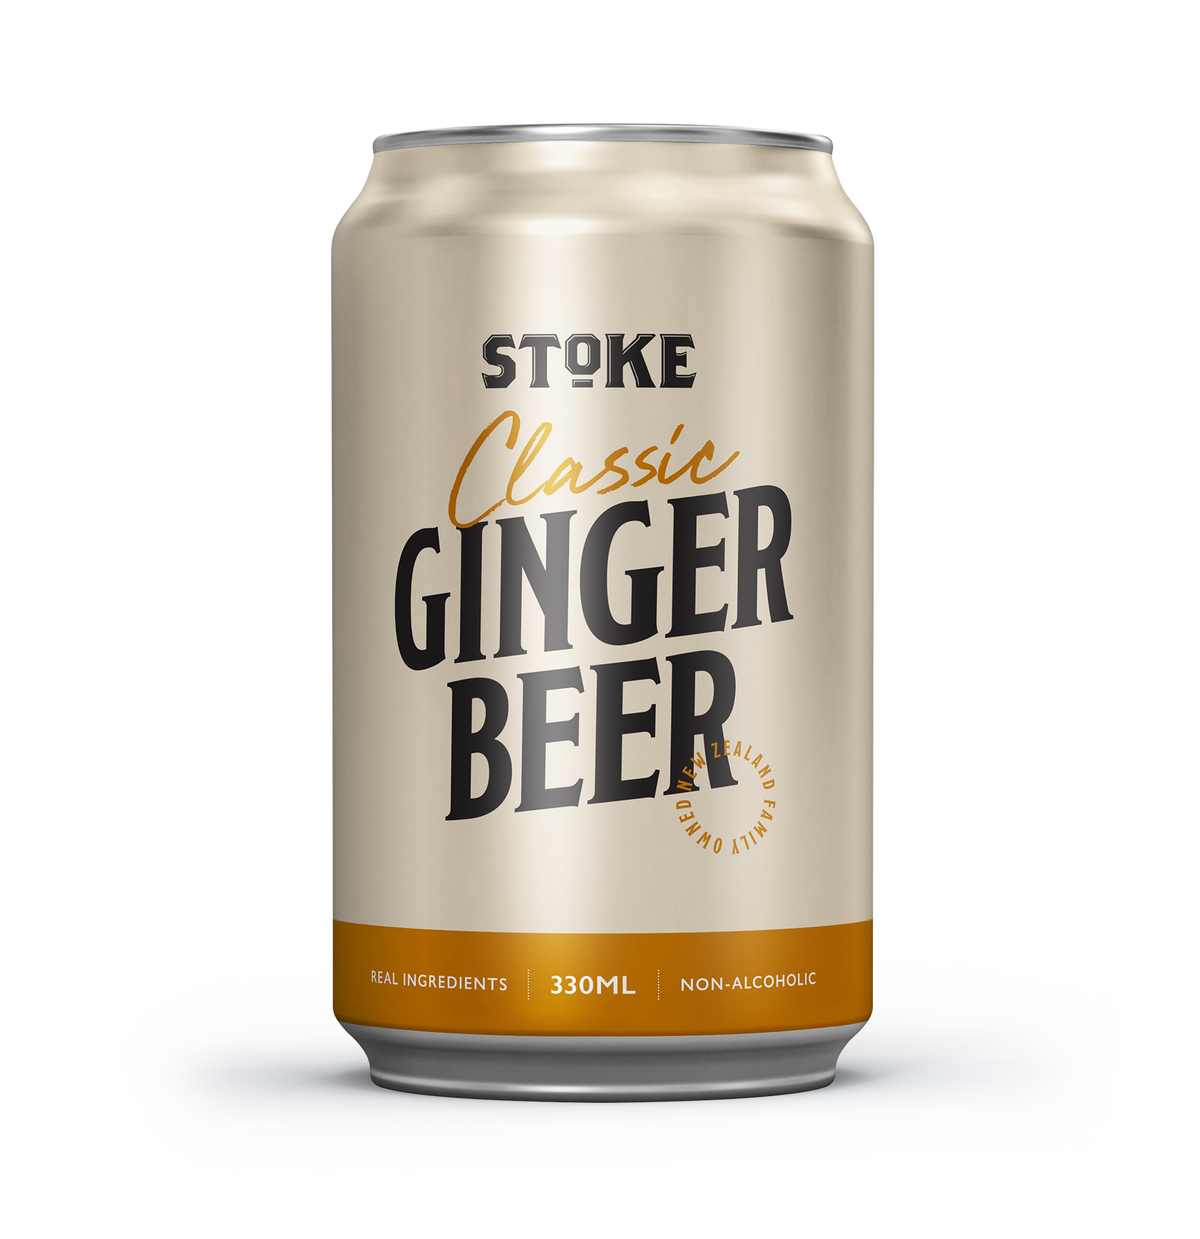 Ginger Beer 12 Pack Cans (Non-Alcoholic)